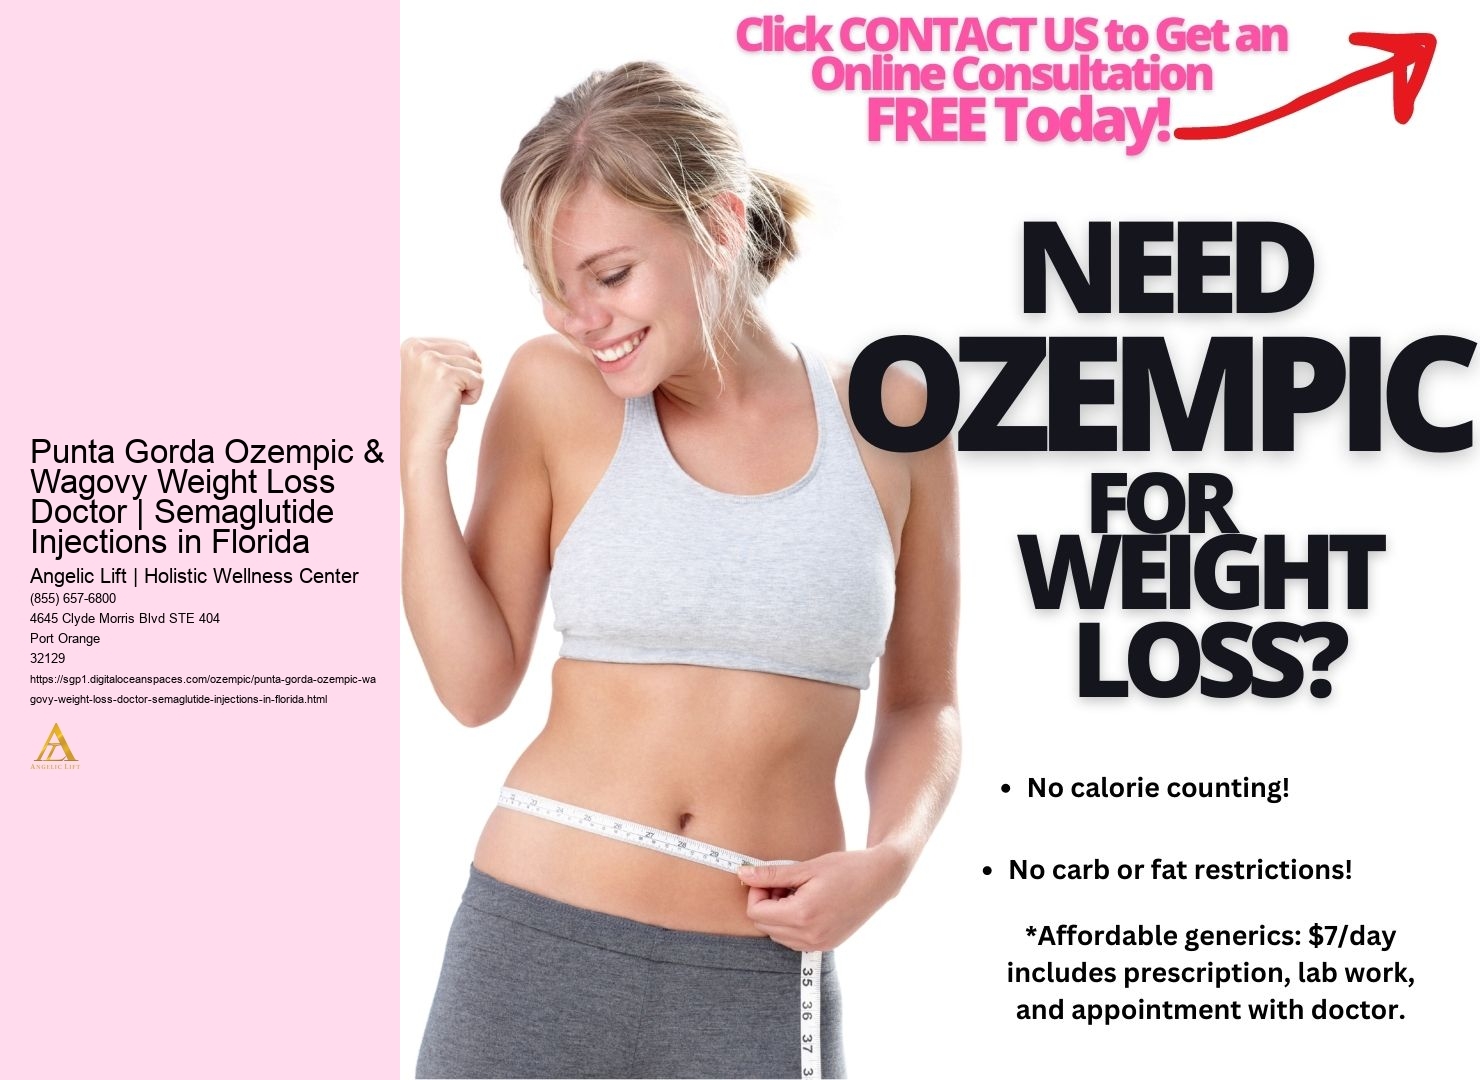 Punta Gorda Ozempic & Wagovy Weight Loss Doctor | Semaglutide Injections in Florida